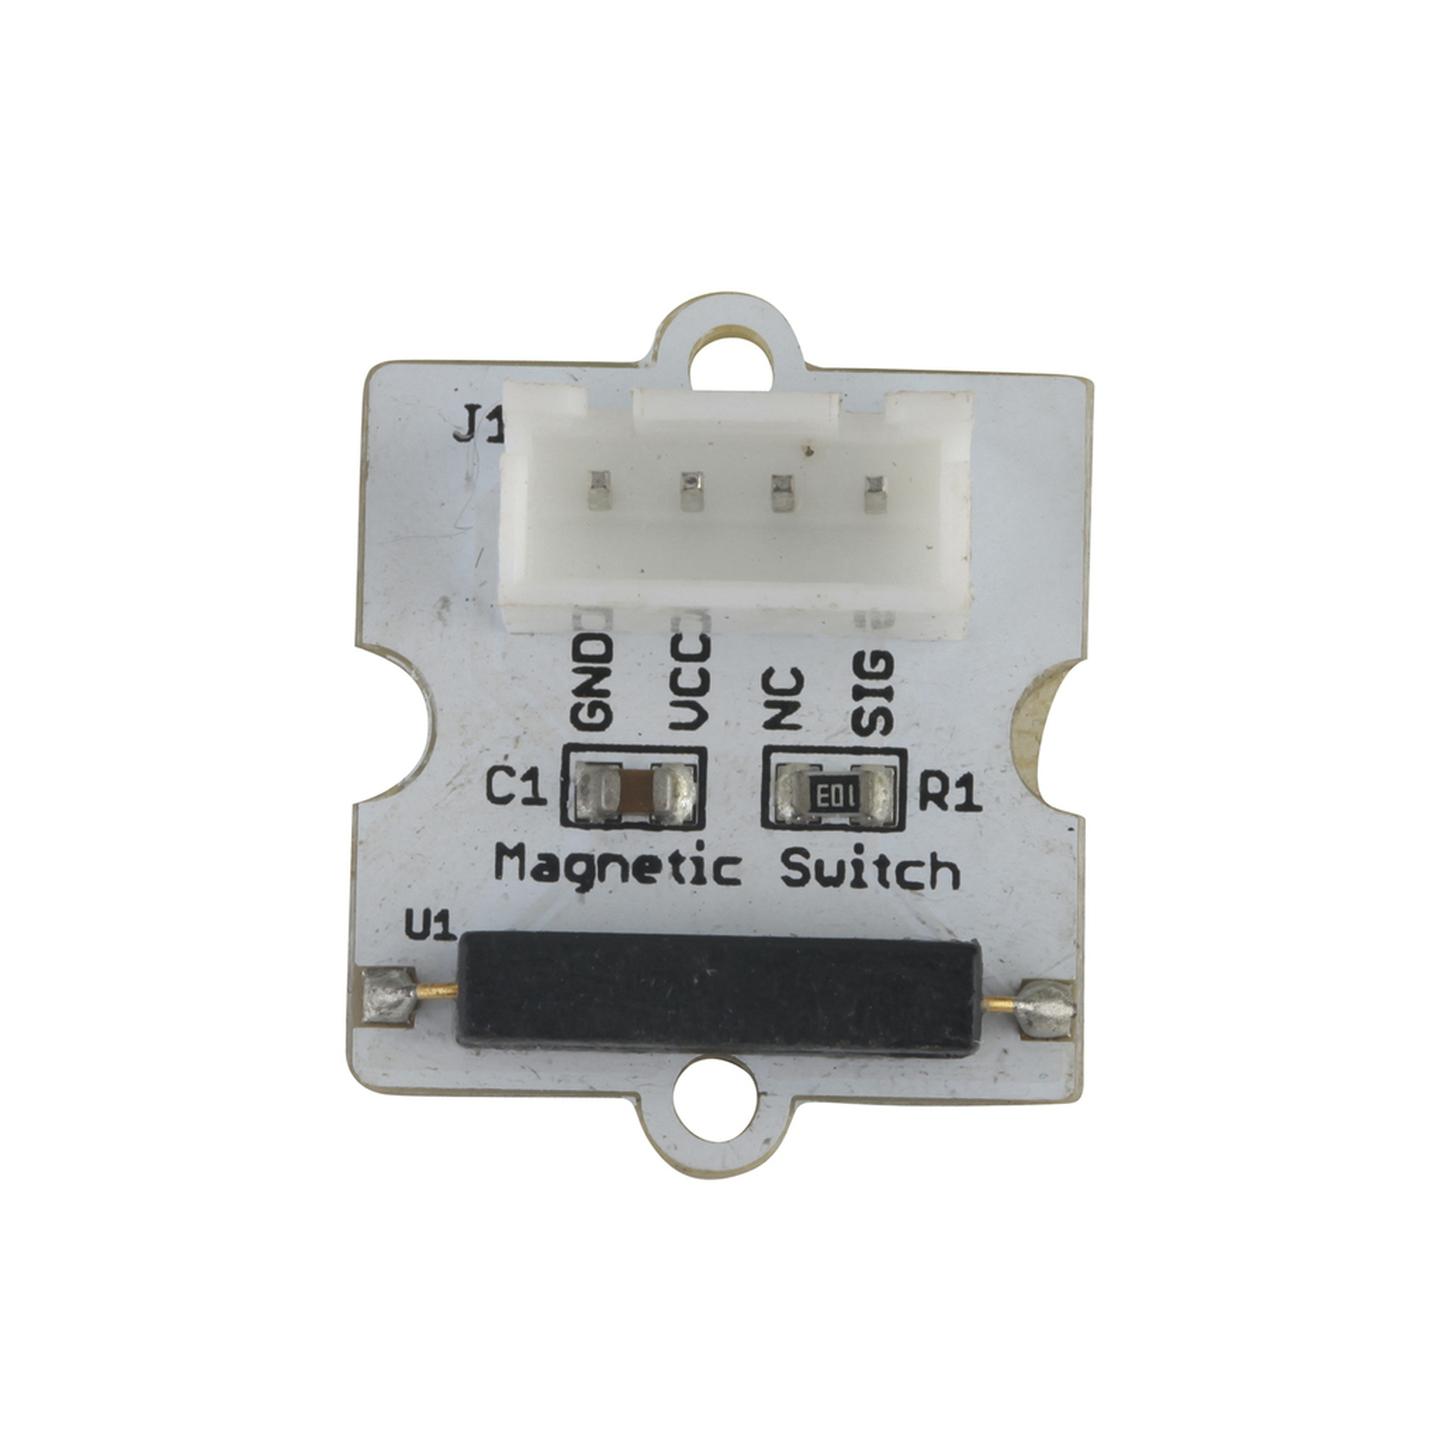 Linker Magnetic Switch Module for Arduino